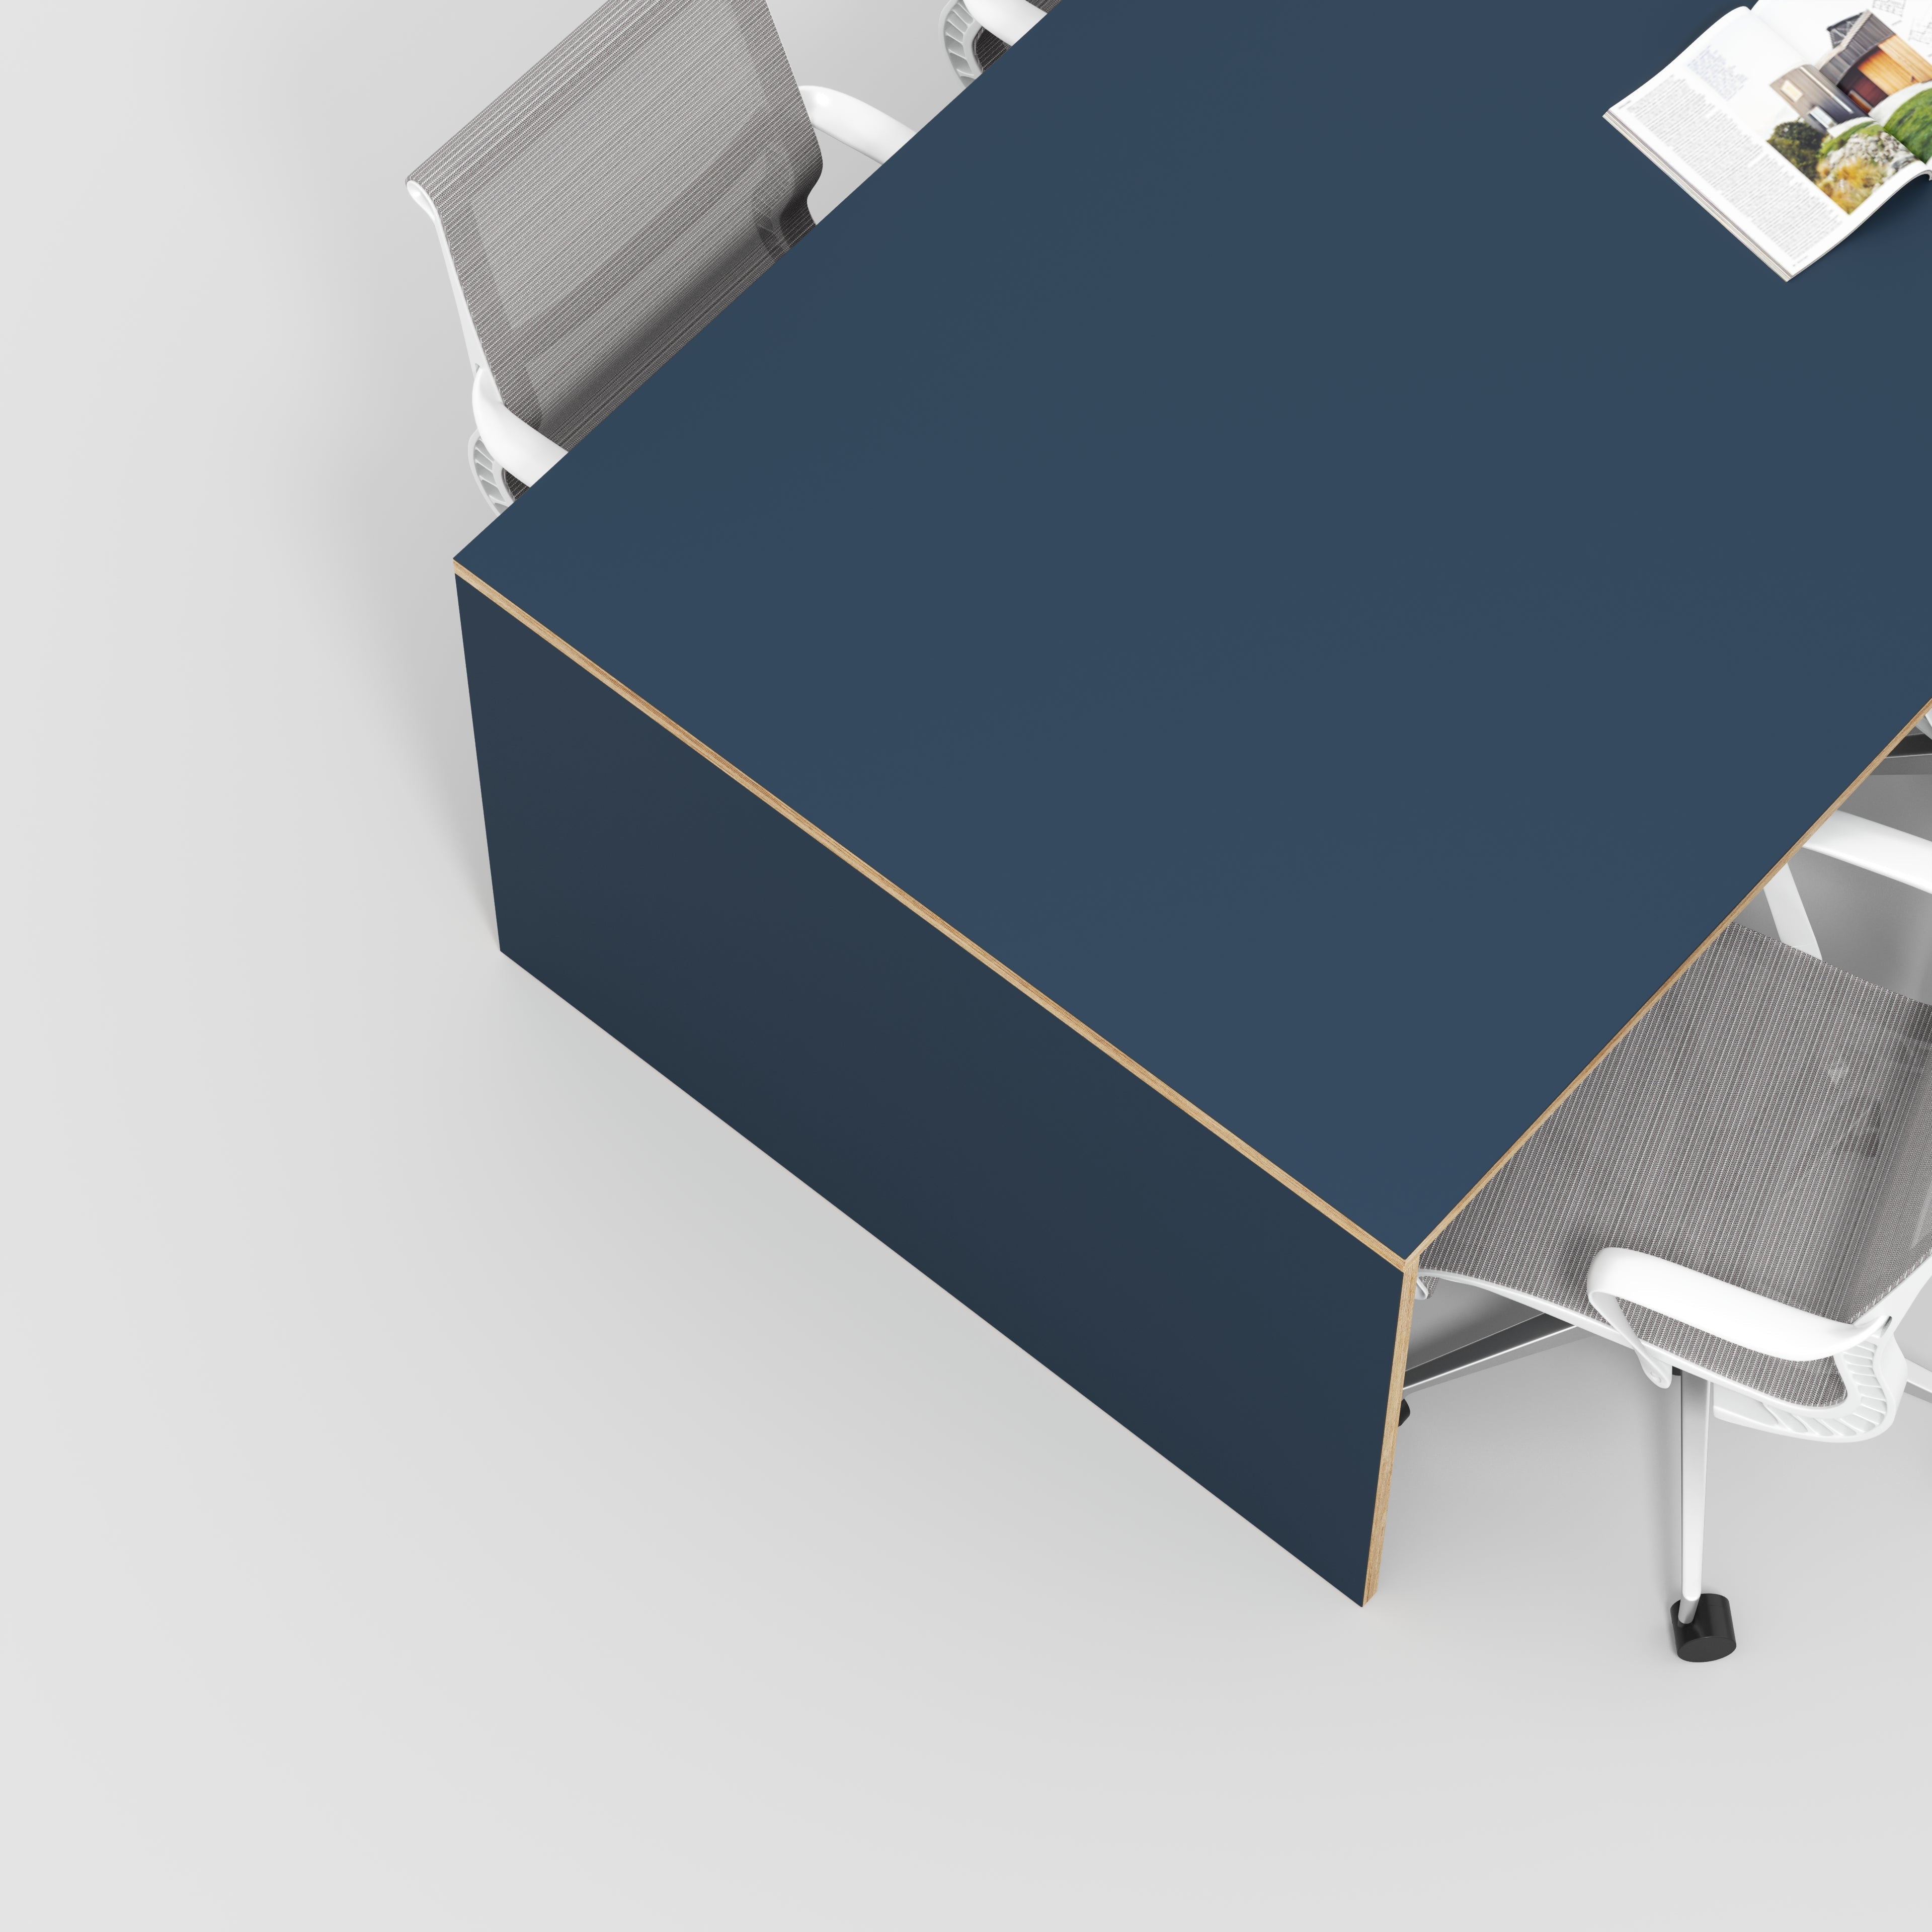 Table with Solid Sides - Formica Night Sea Blue - 4000(w) x 1000(d) x 750(h)